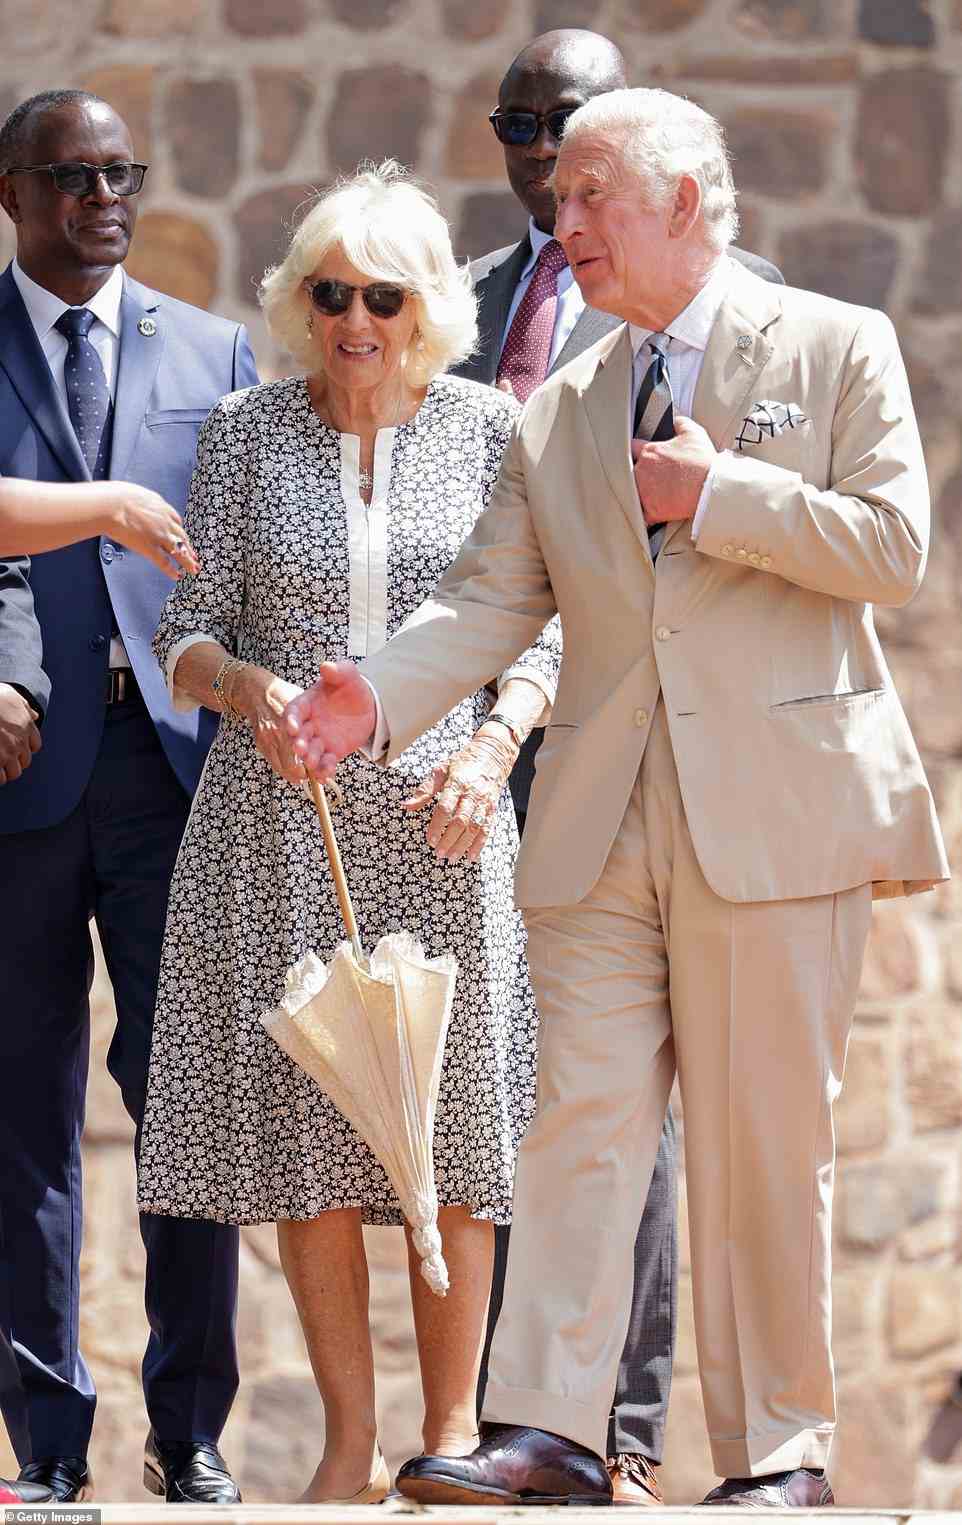 The Prince of Wales and his wife Camilla were welcomed to the engagement by survivors of the mass genocide on Wednesday